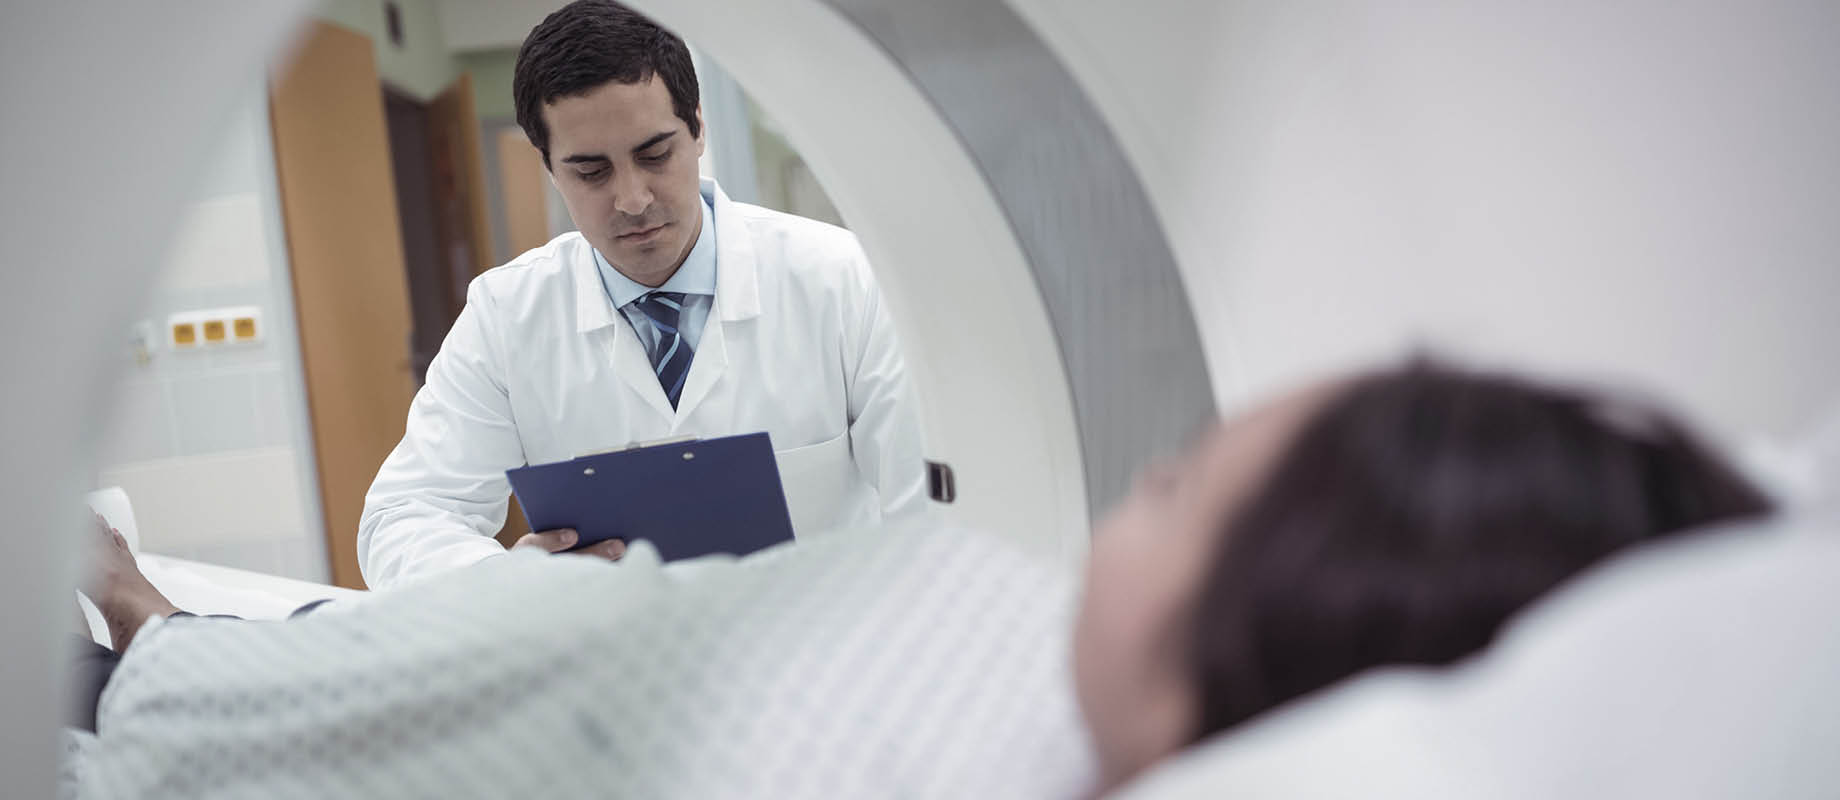 A Simple Isodose Plan Checklist for Auditing Radiation Oncology